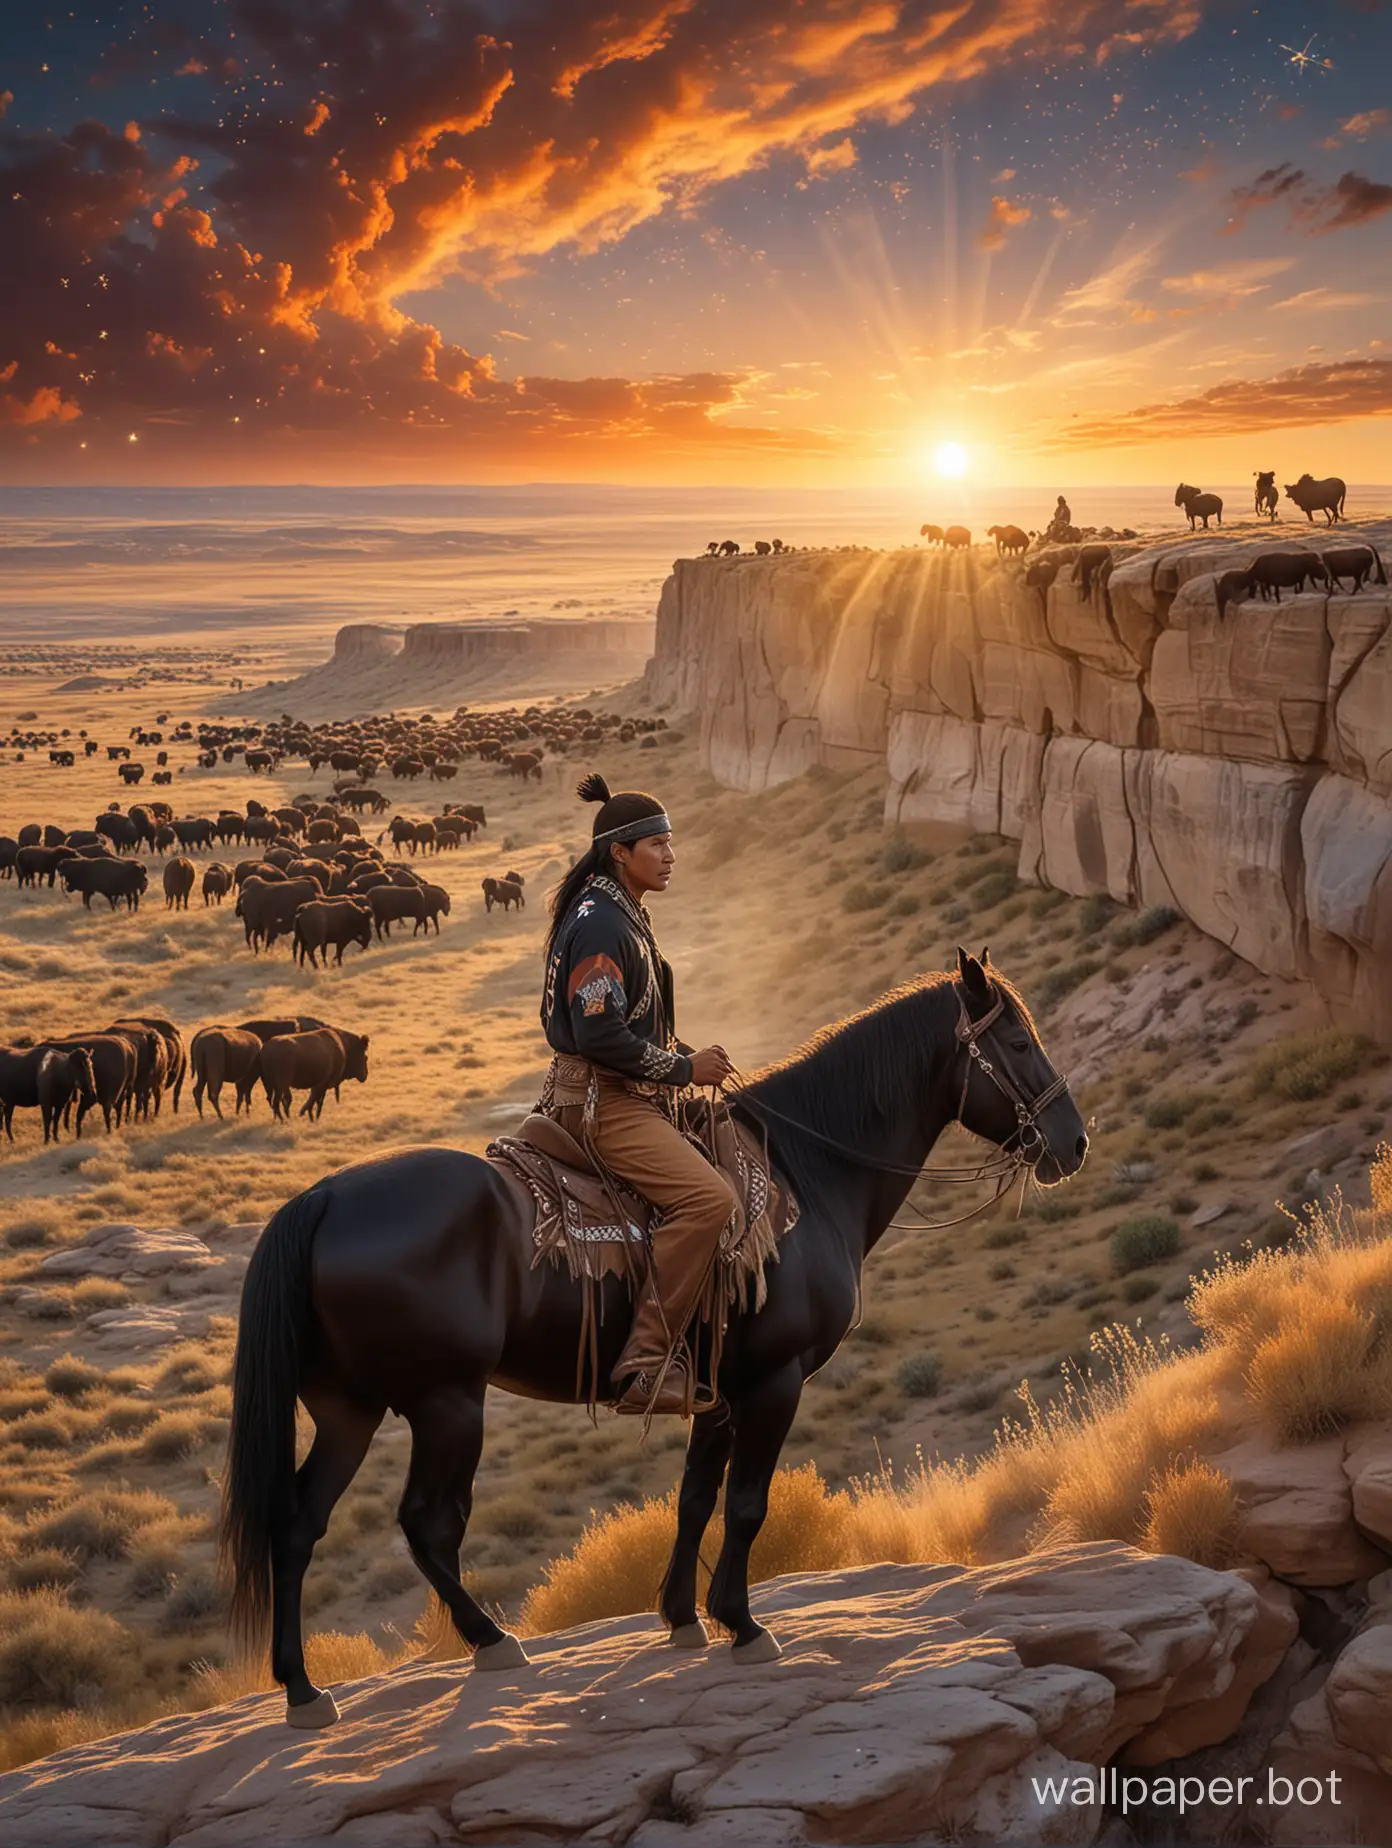 Native American man riding a black paint horse overlooking a herd of buffalo from a cliff in the plains , the sky is painted with a sunset with stars shining